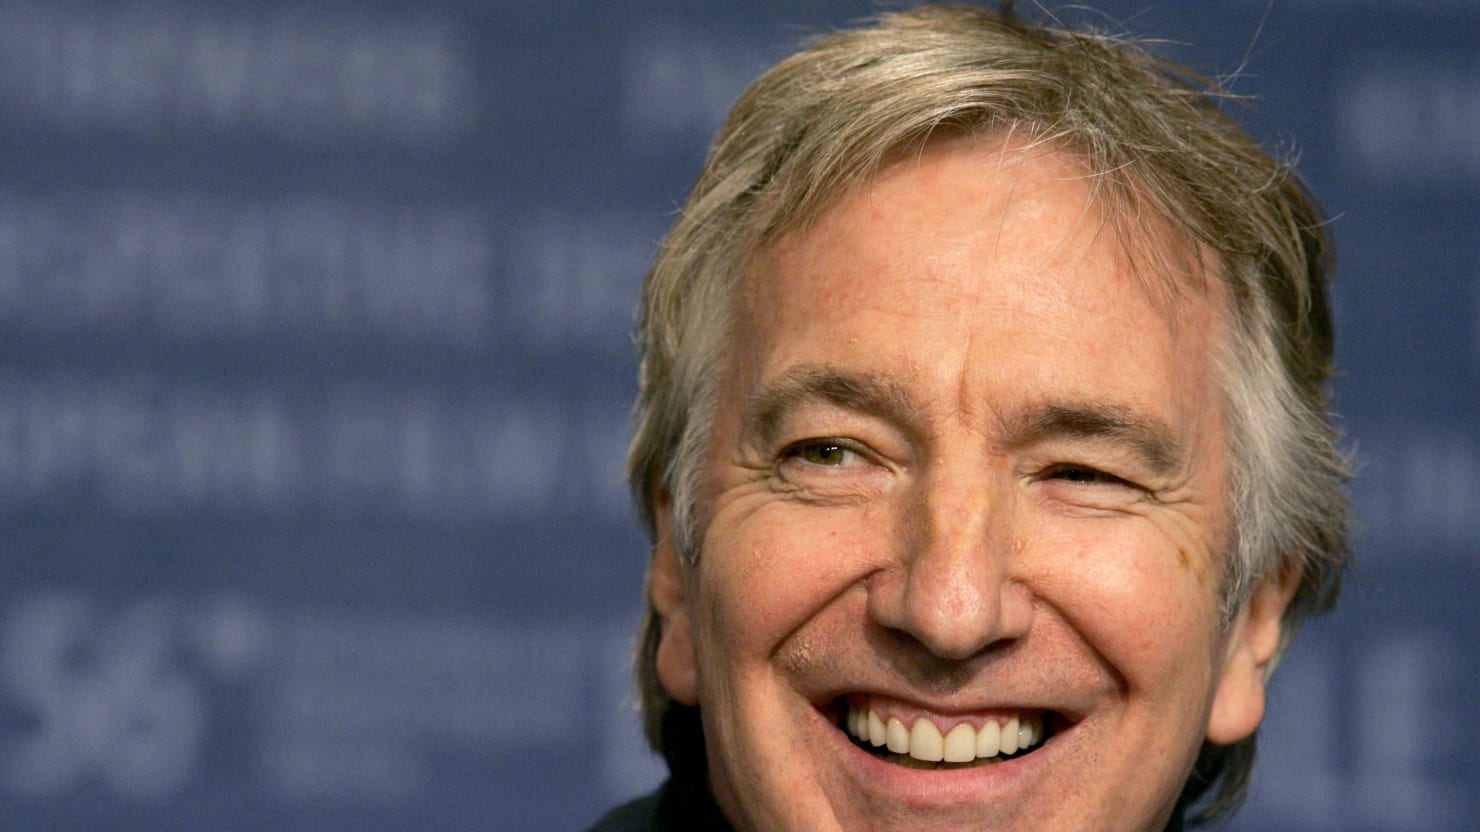 Alan Rickman: The Voice That Could Move Mountains.